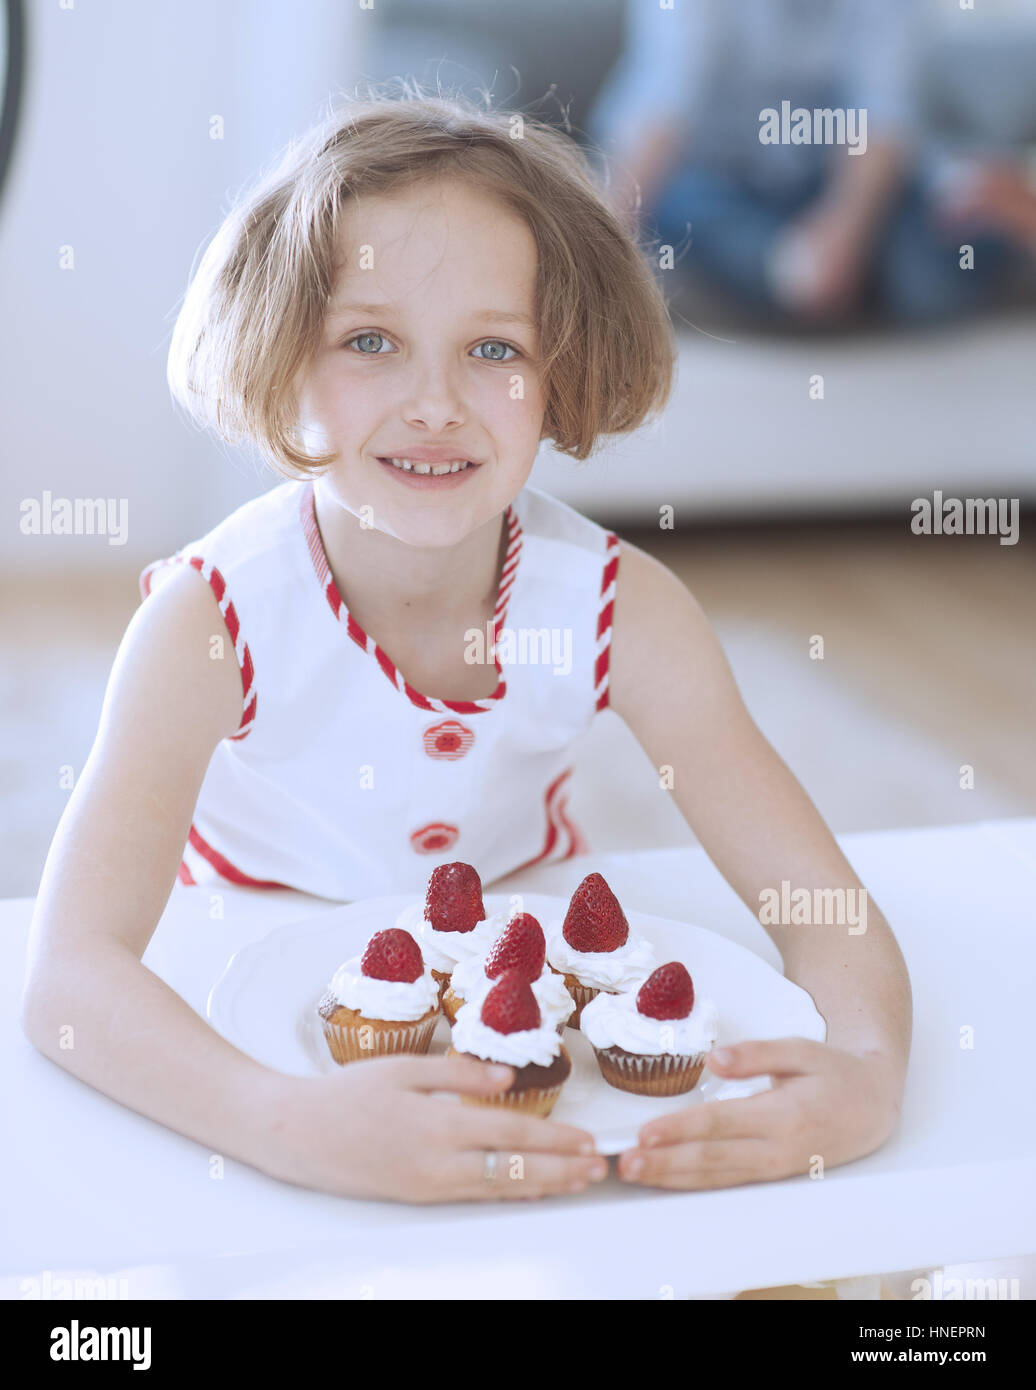 Young girl with plate of cupcakes Stock Photo